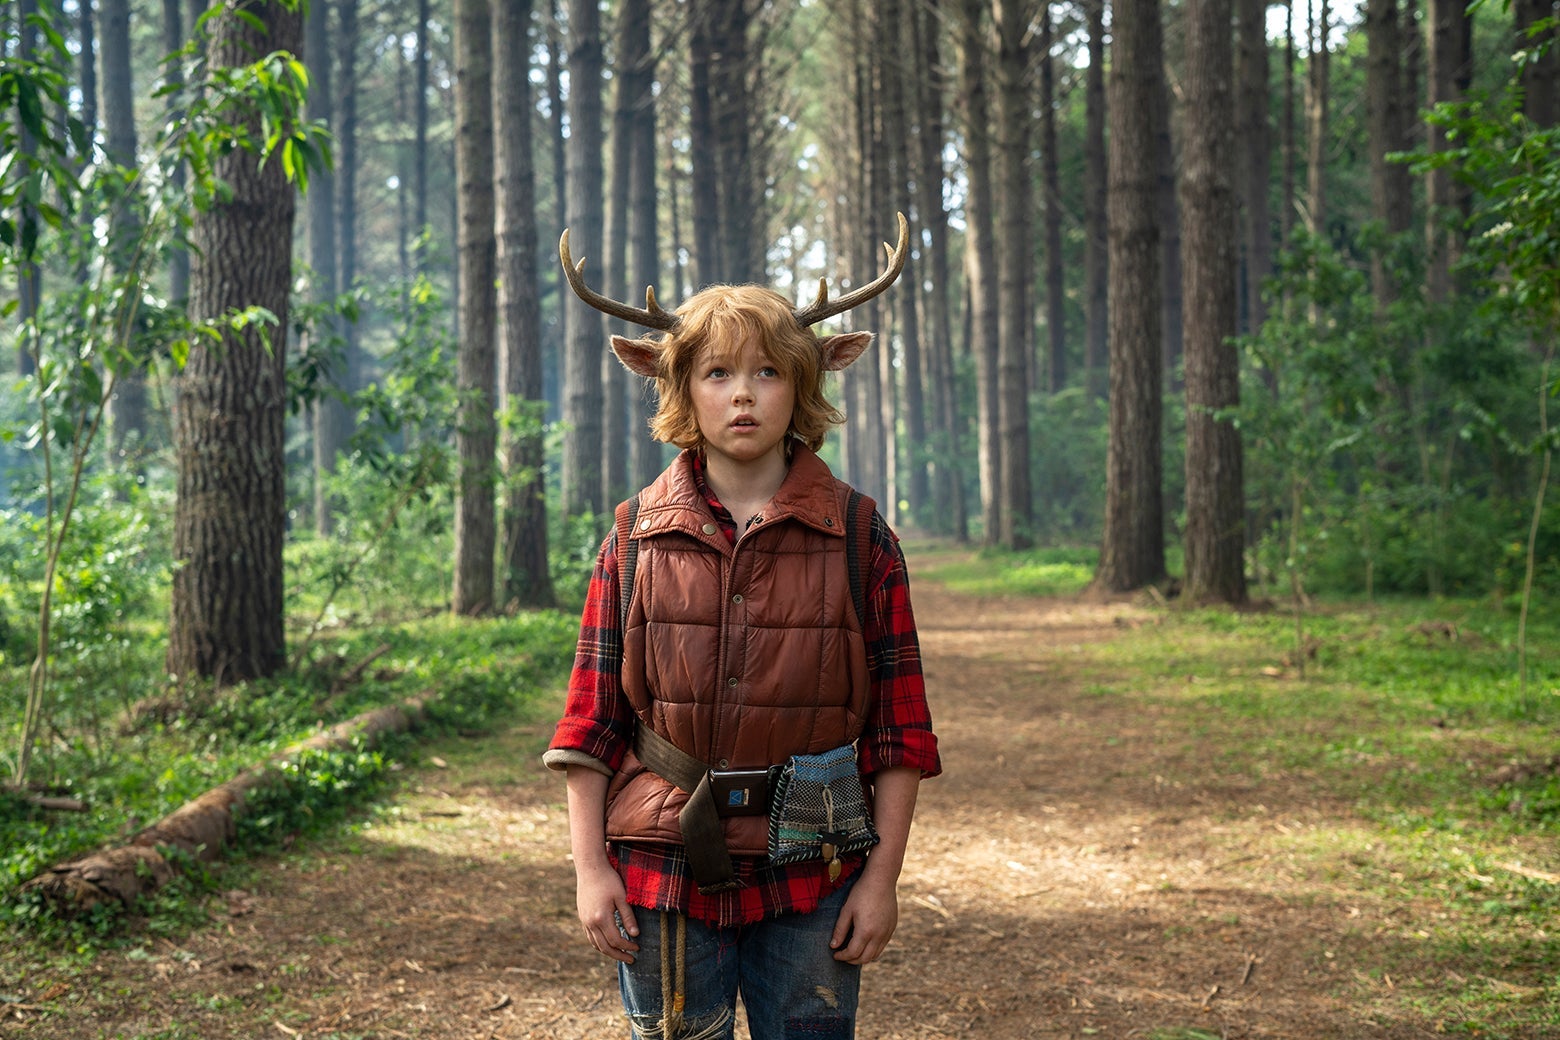 Actor Christian Convery as Gus, a boy with antlers on his head, standing in the woods in a still from Sweet Tooth.